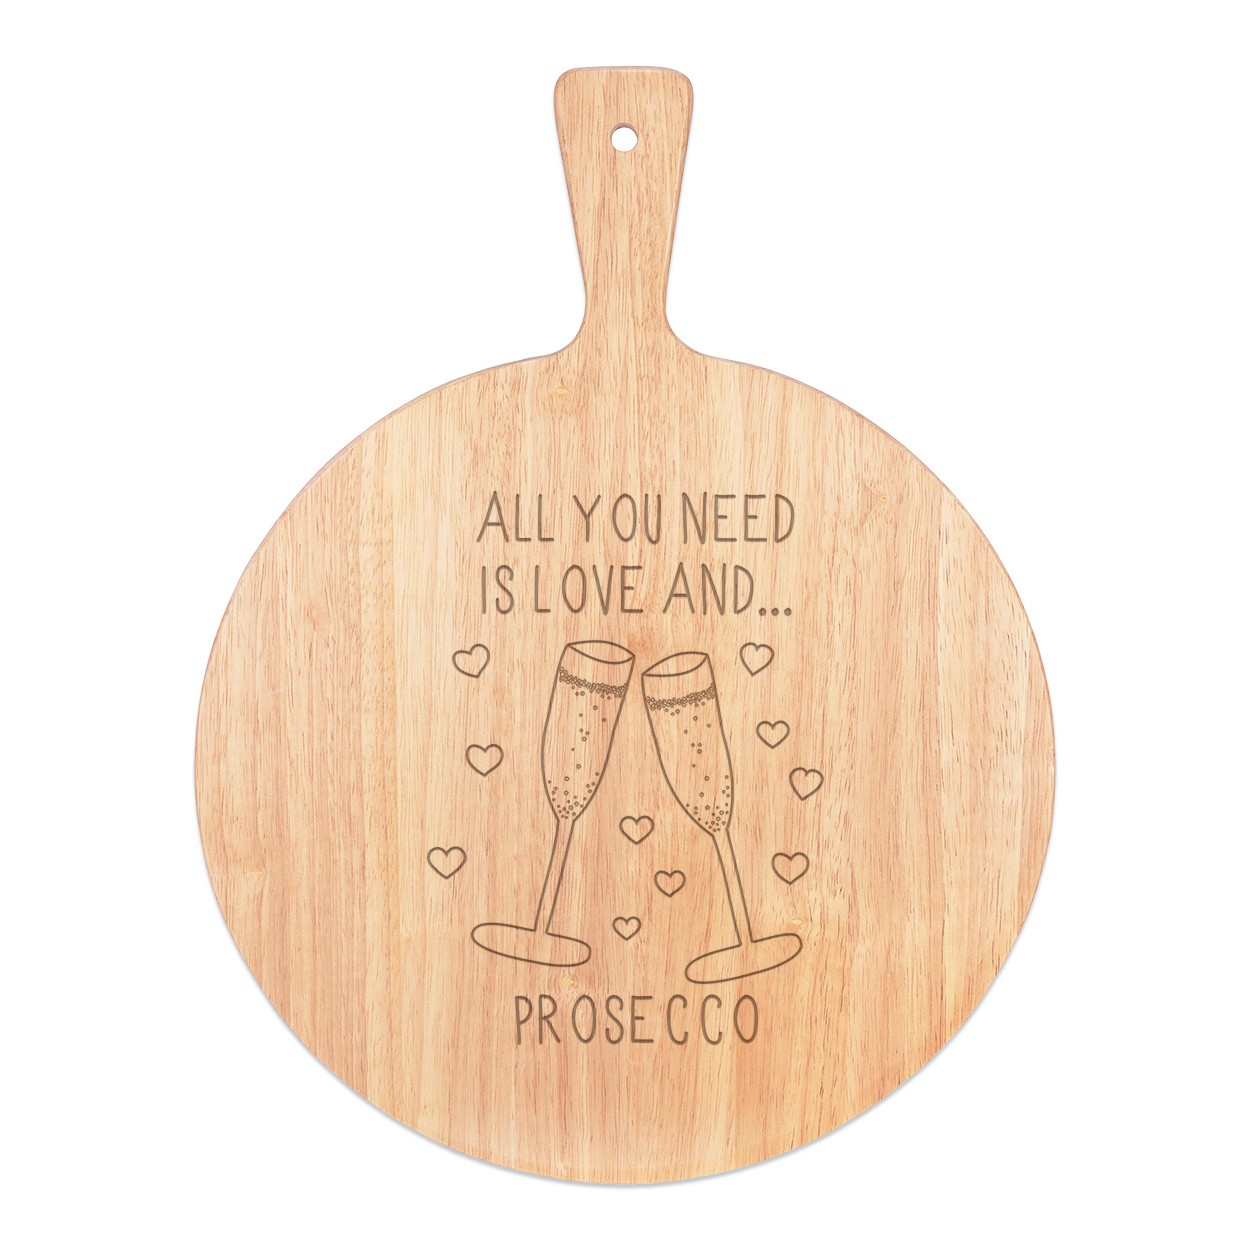 All You Need Is Love And Prosecco Pizza Board Paddle Serving Tray Handle Round Wooden 45x34cm